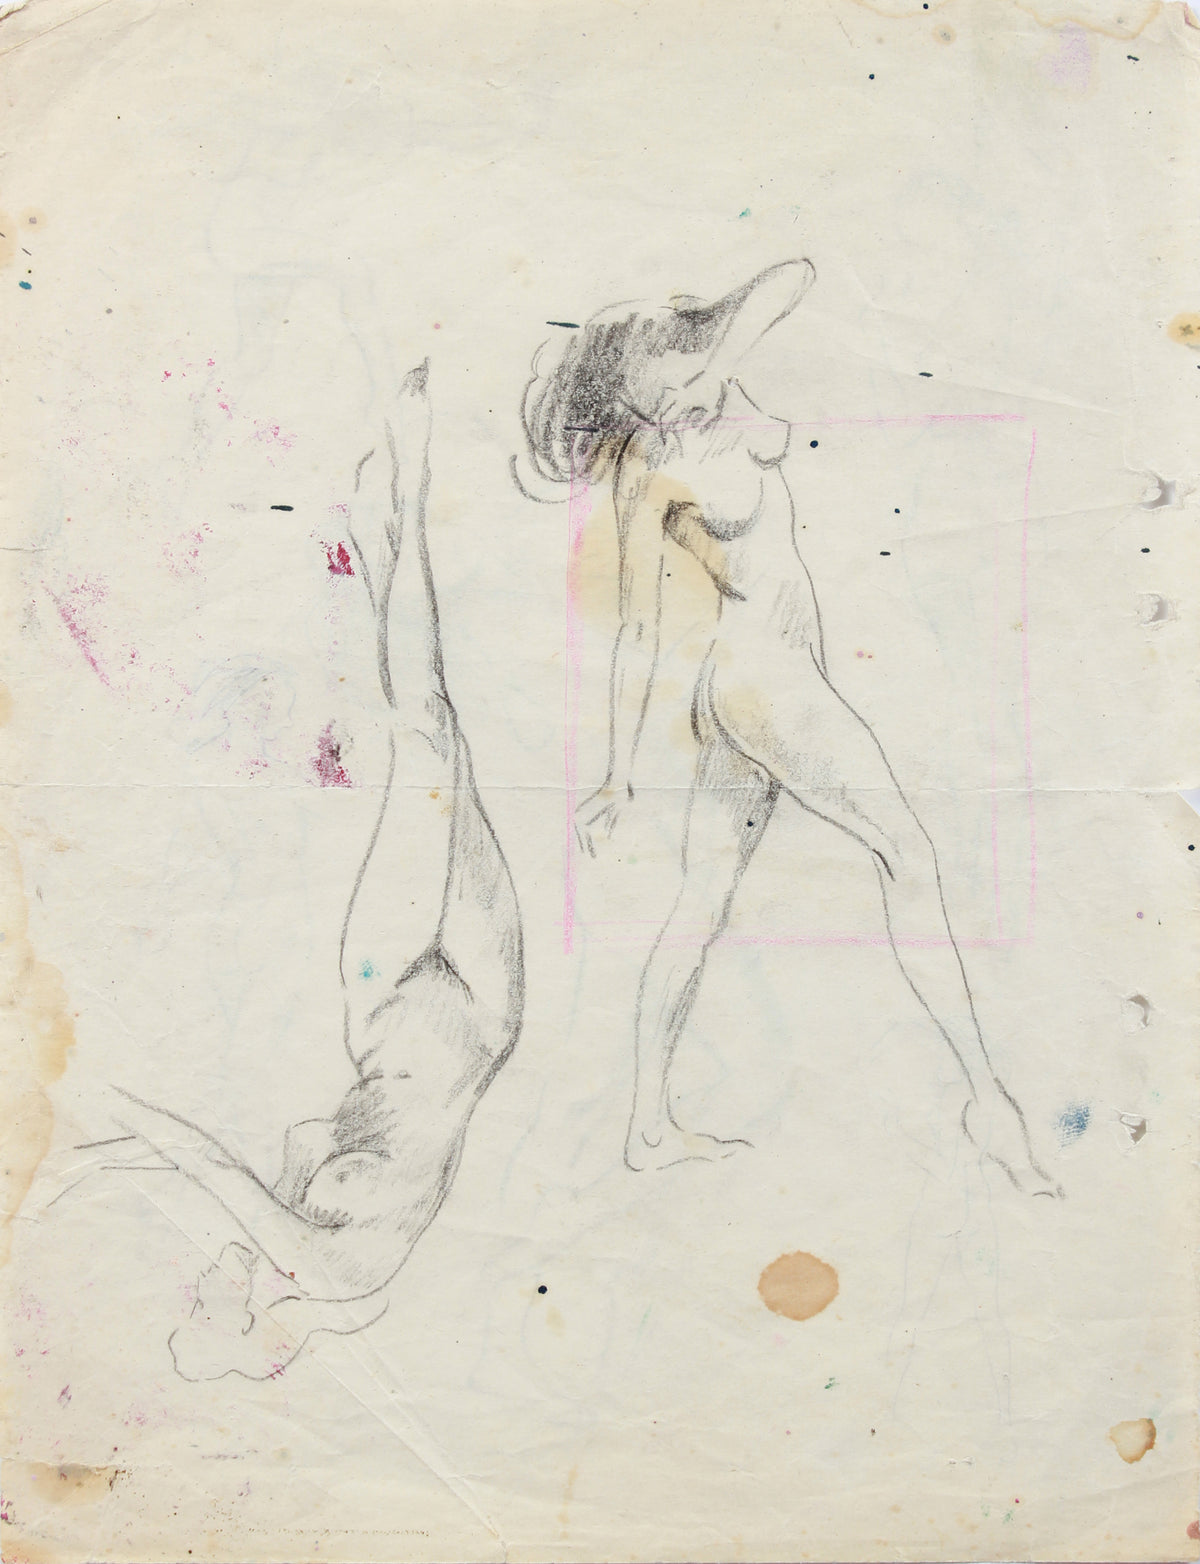 Nymph-like Figures - Study &lt;br&gt;20th Century Mixed Media Drawing &lt;br&gt;&lt;br&gt;#A7974